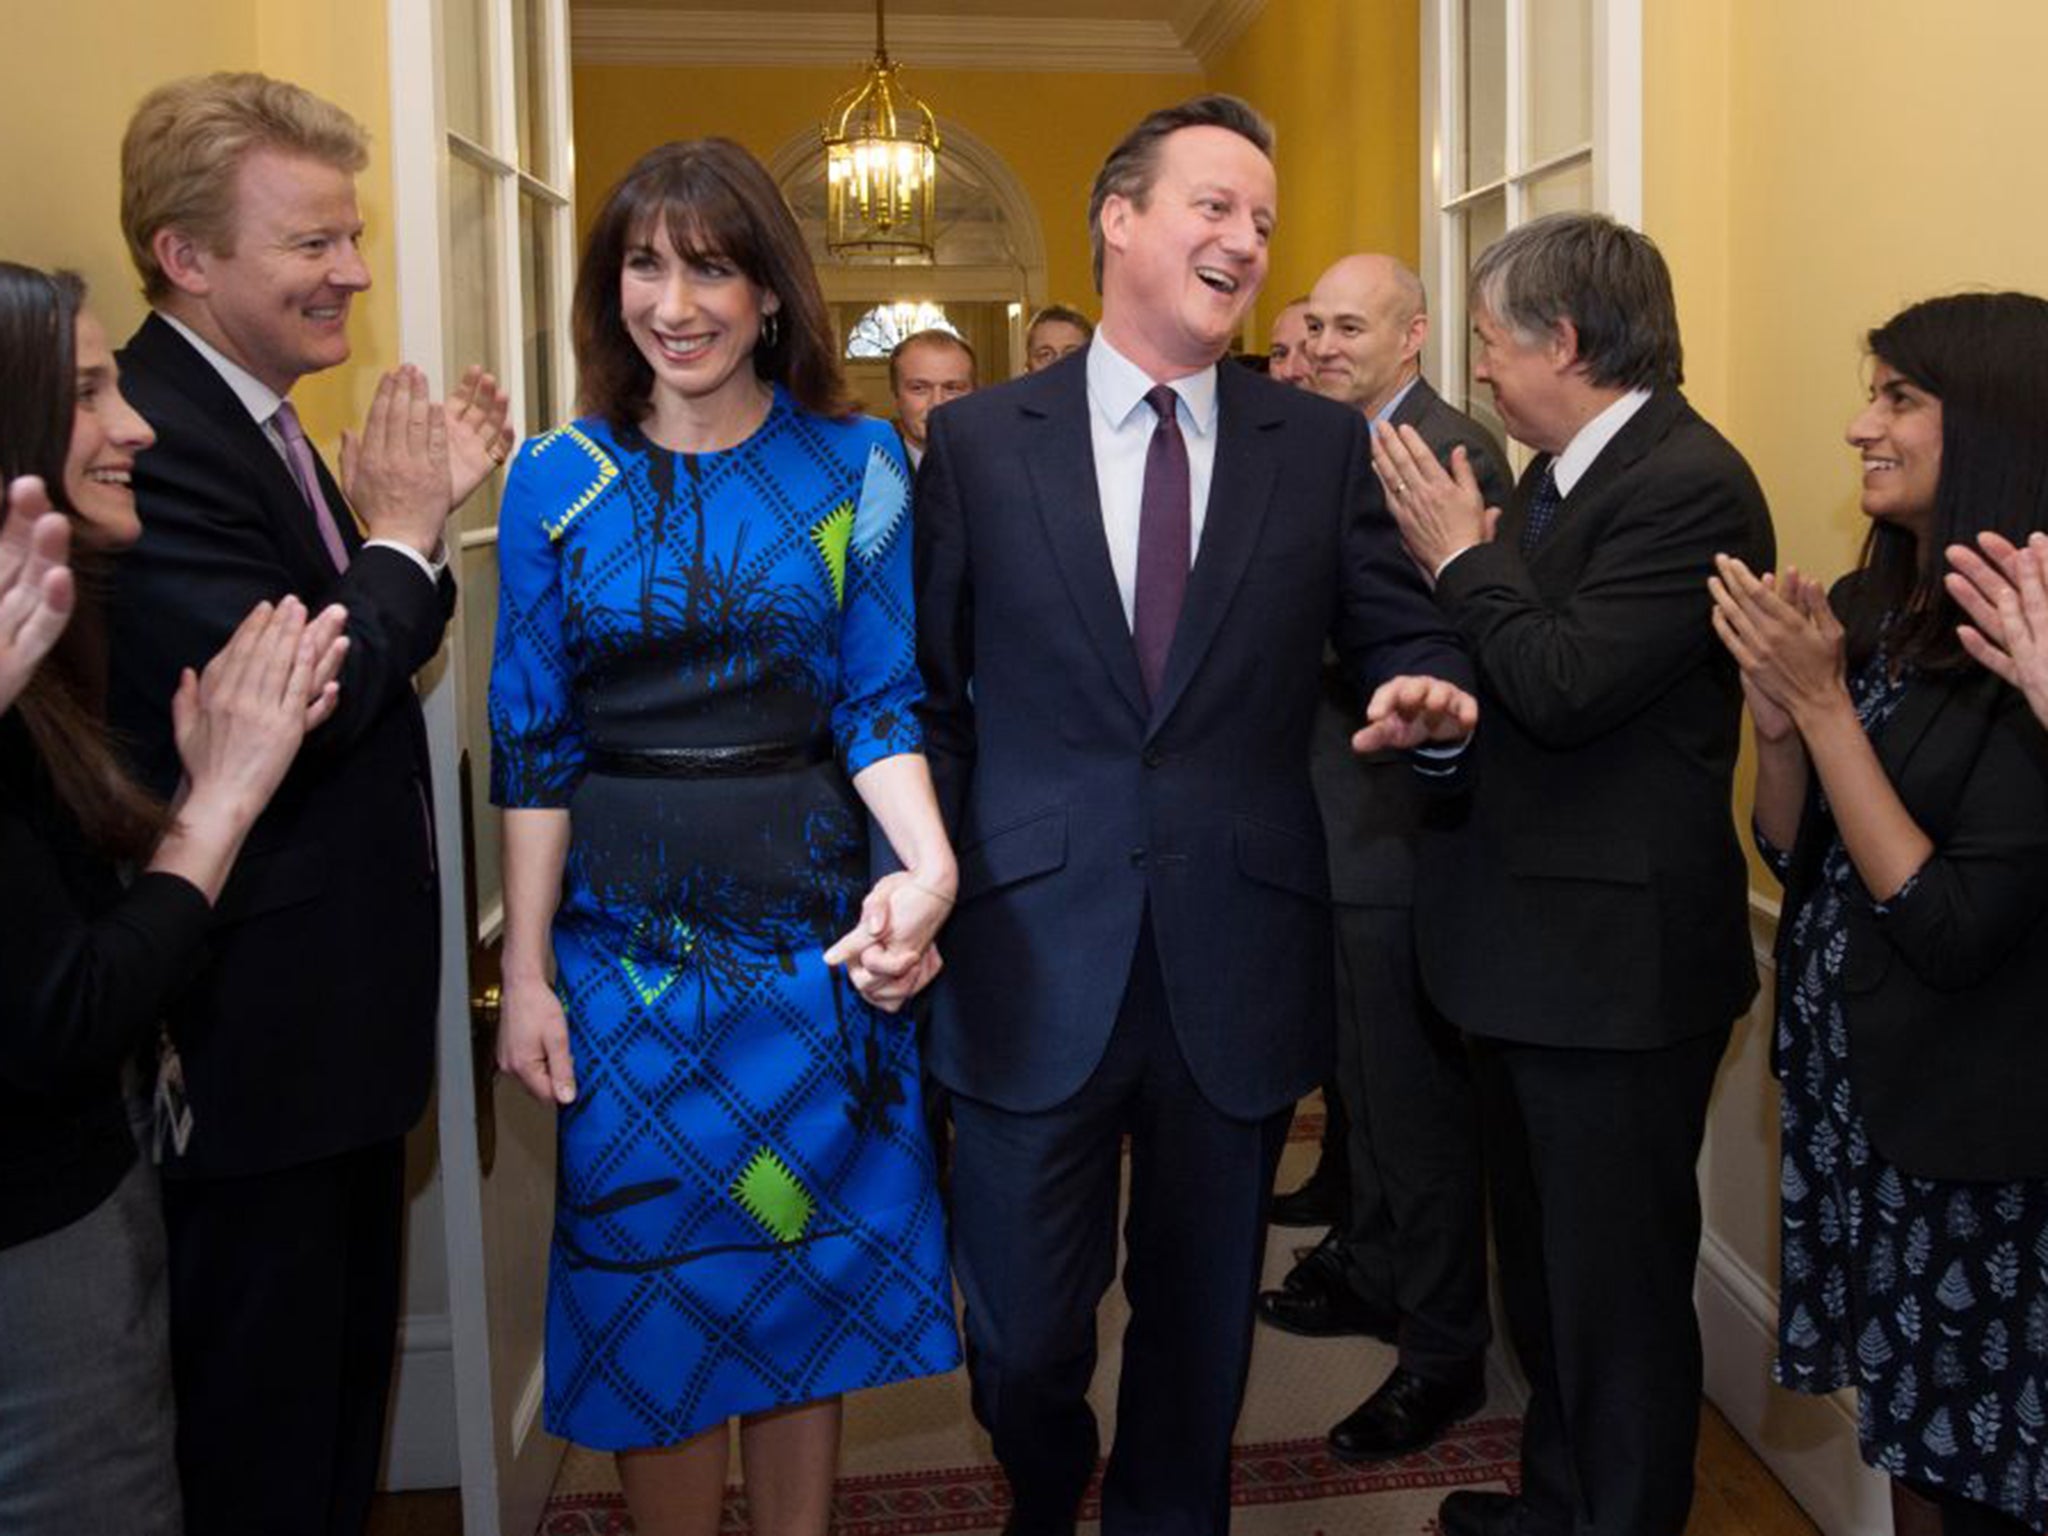 David Cameron and his wife Samantha return to 10 Downing Street after his victory